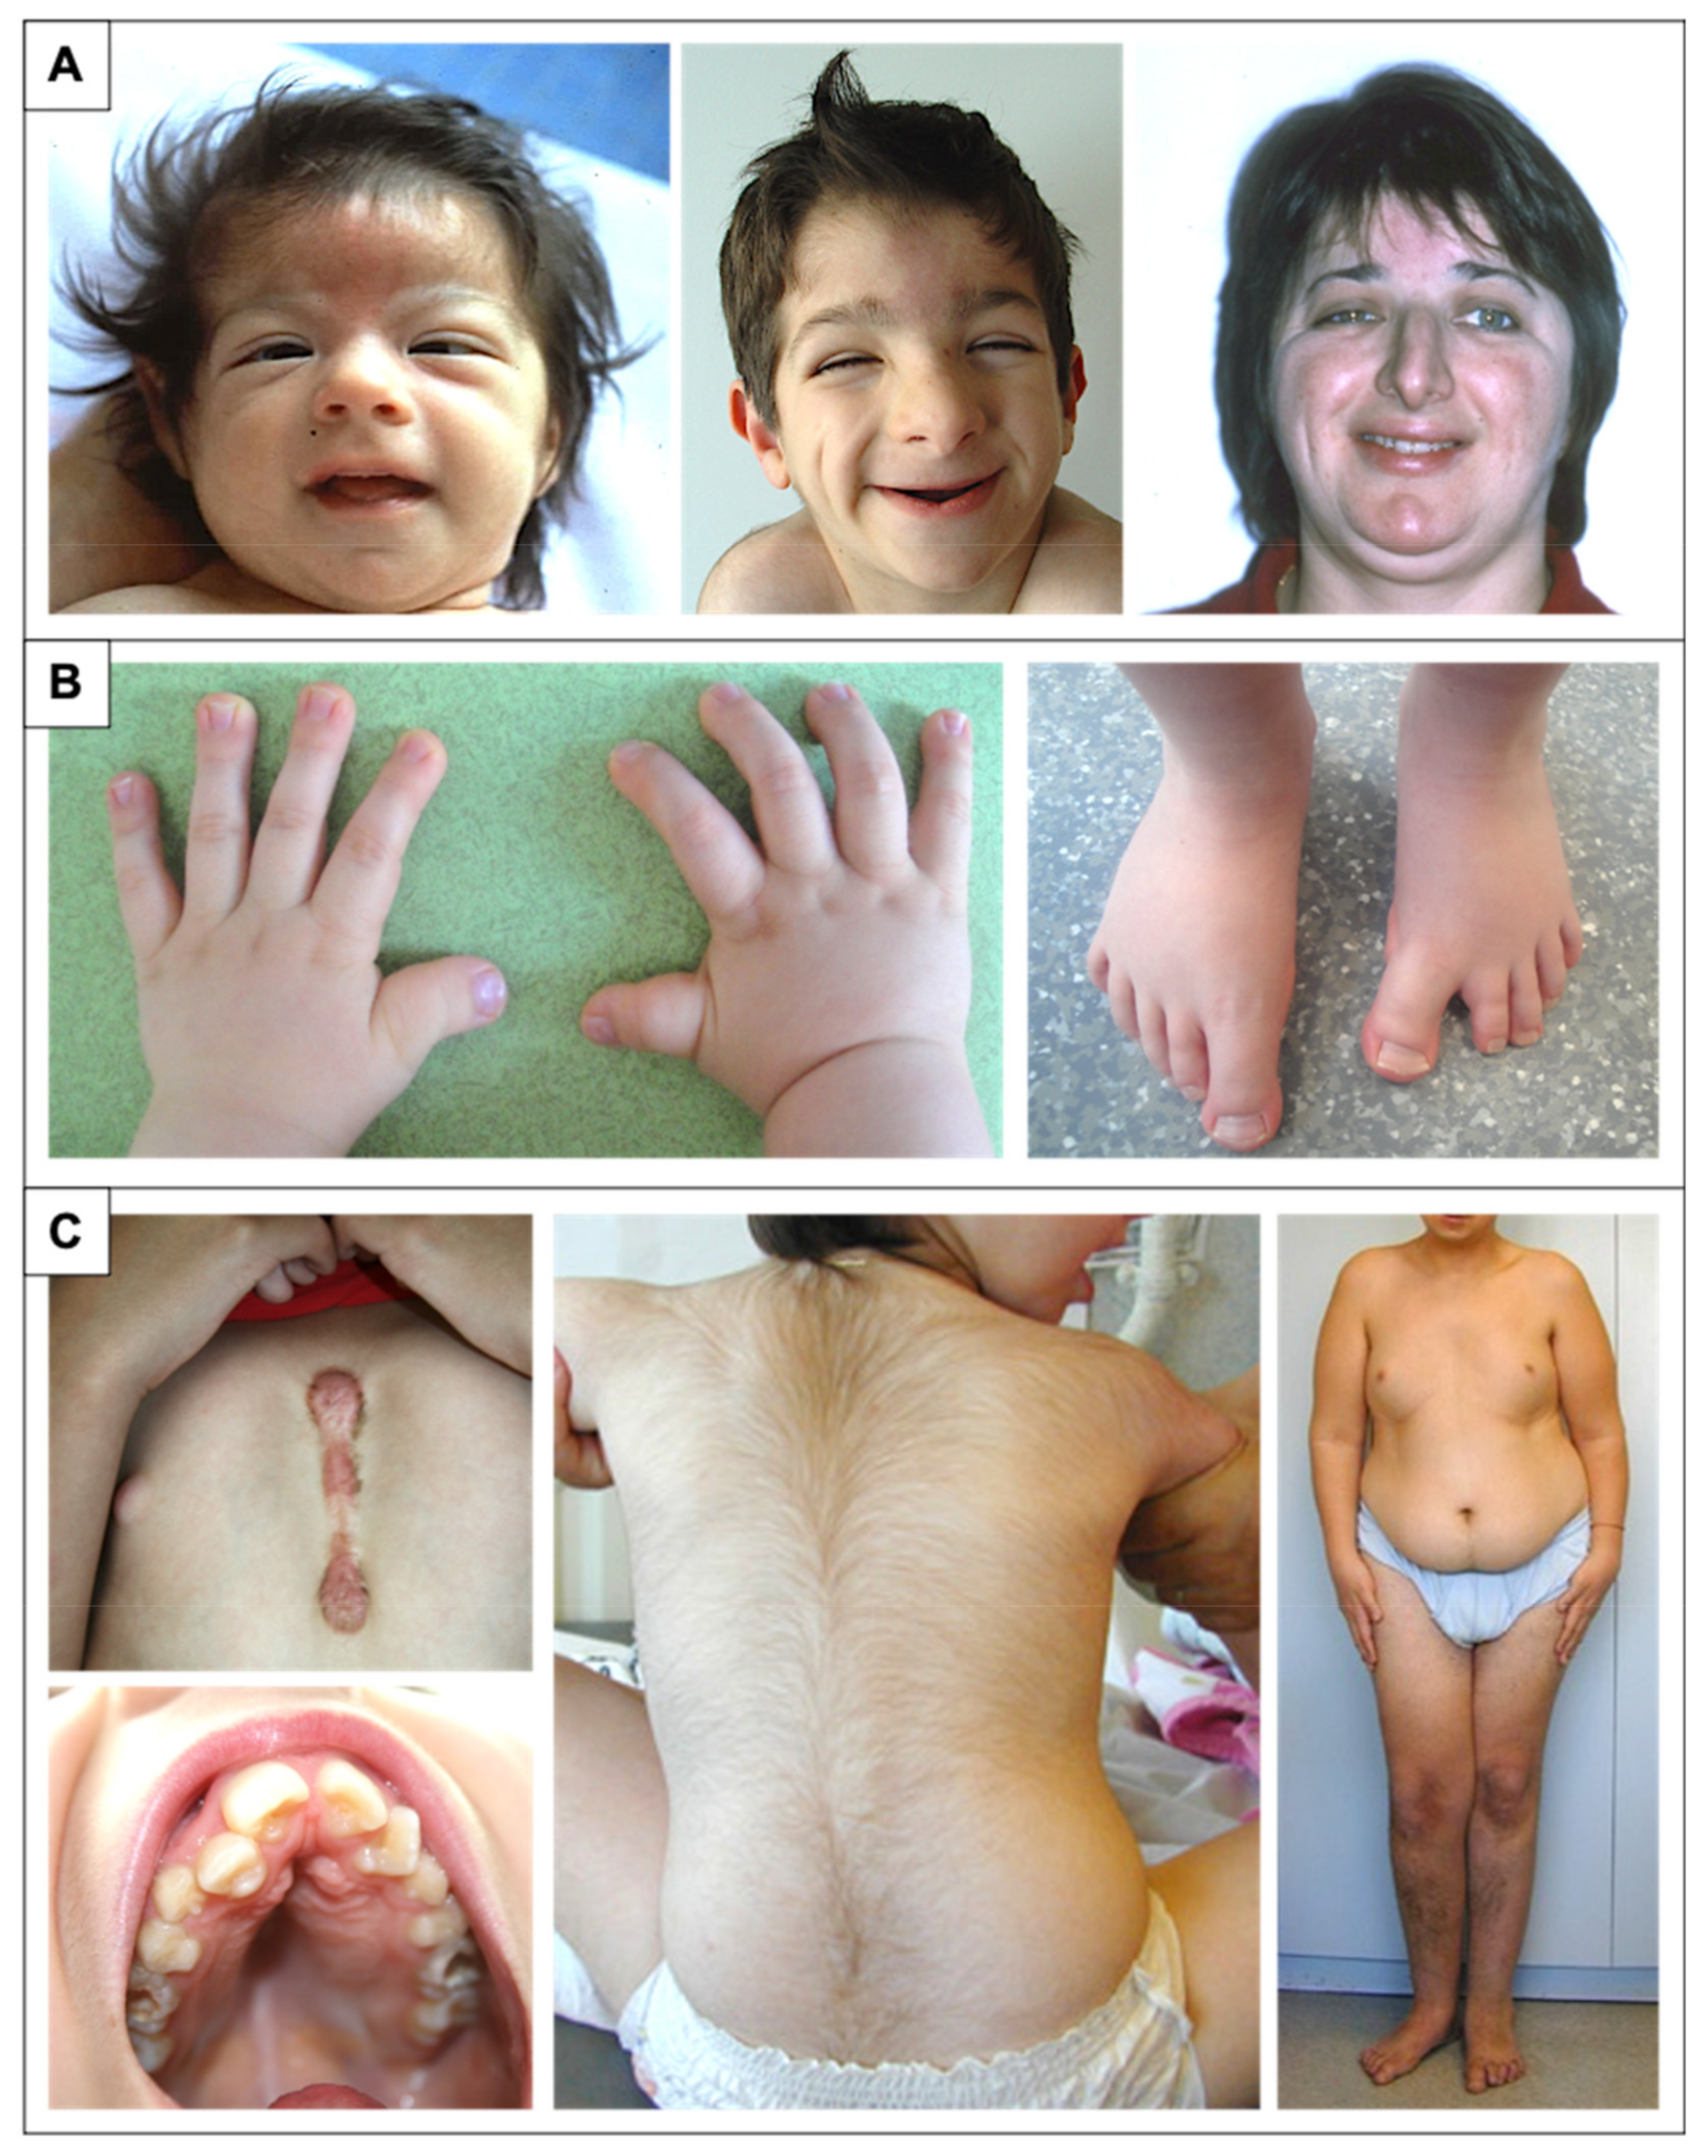 Rubinstein-Taybi syndrome: clinical features, genetic basis